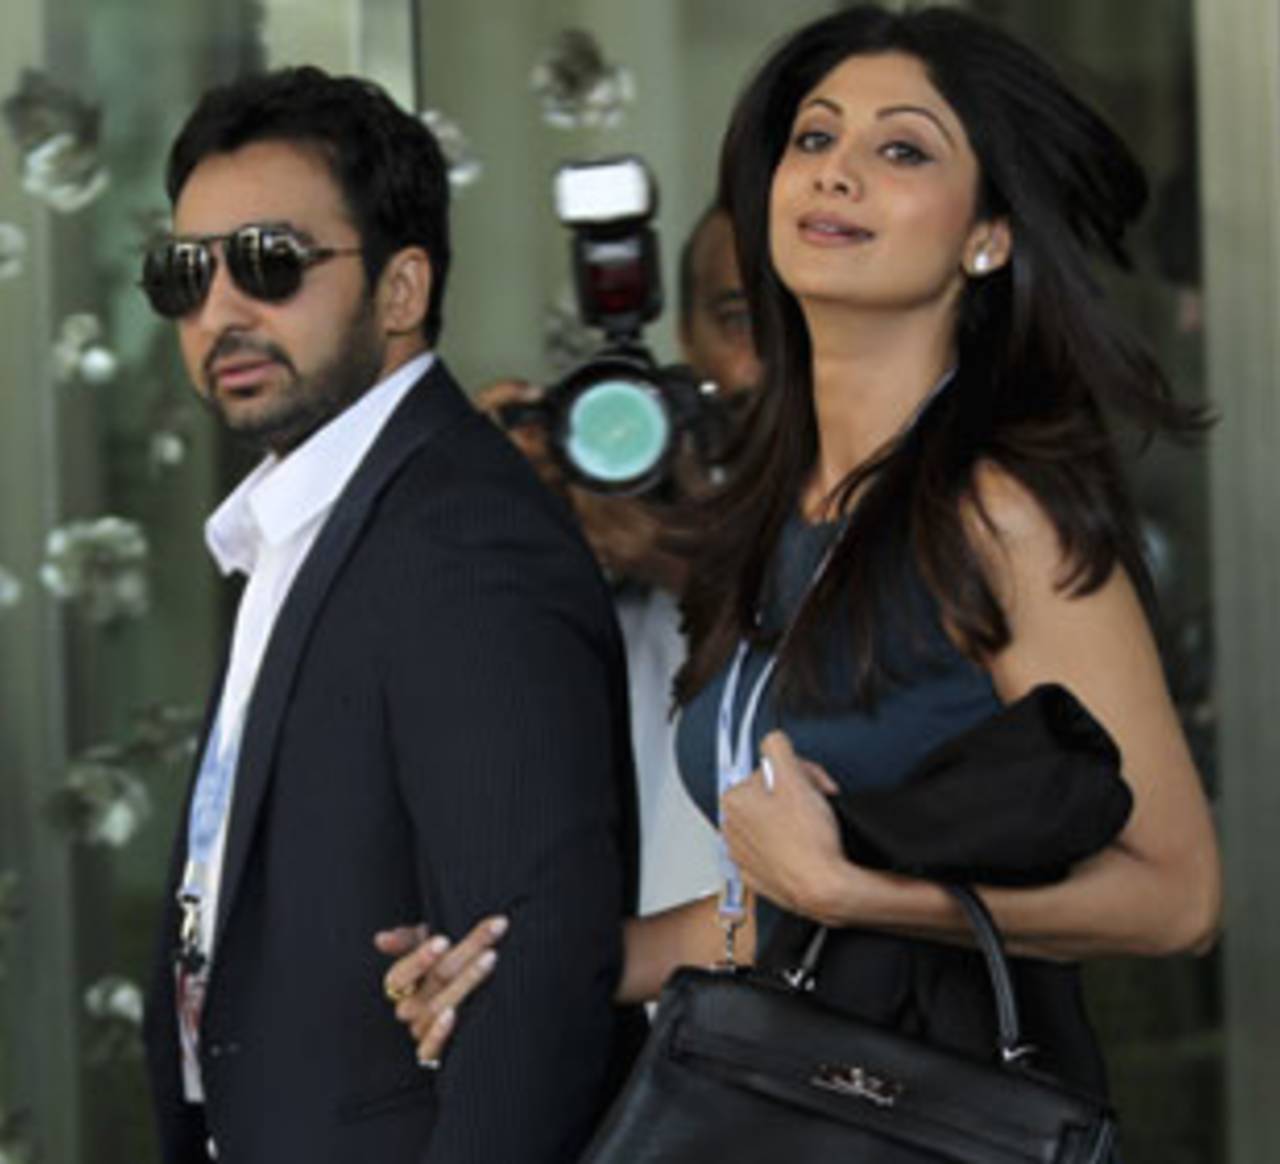 Rajasthan Royals co-owner Raj Kundra [left] has confessed to betting on IPL matches&nbsp;&nbsp;&bull;&nbsp;&nbsp;AFP